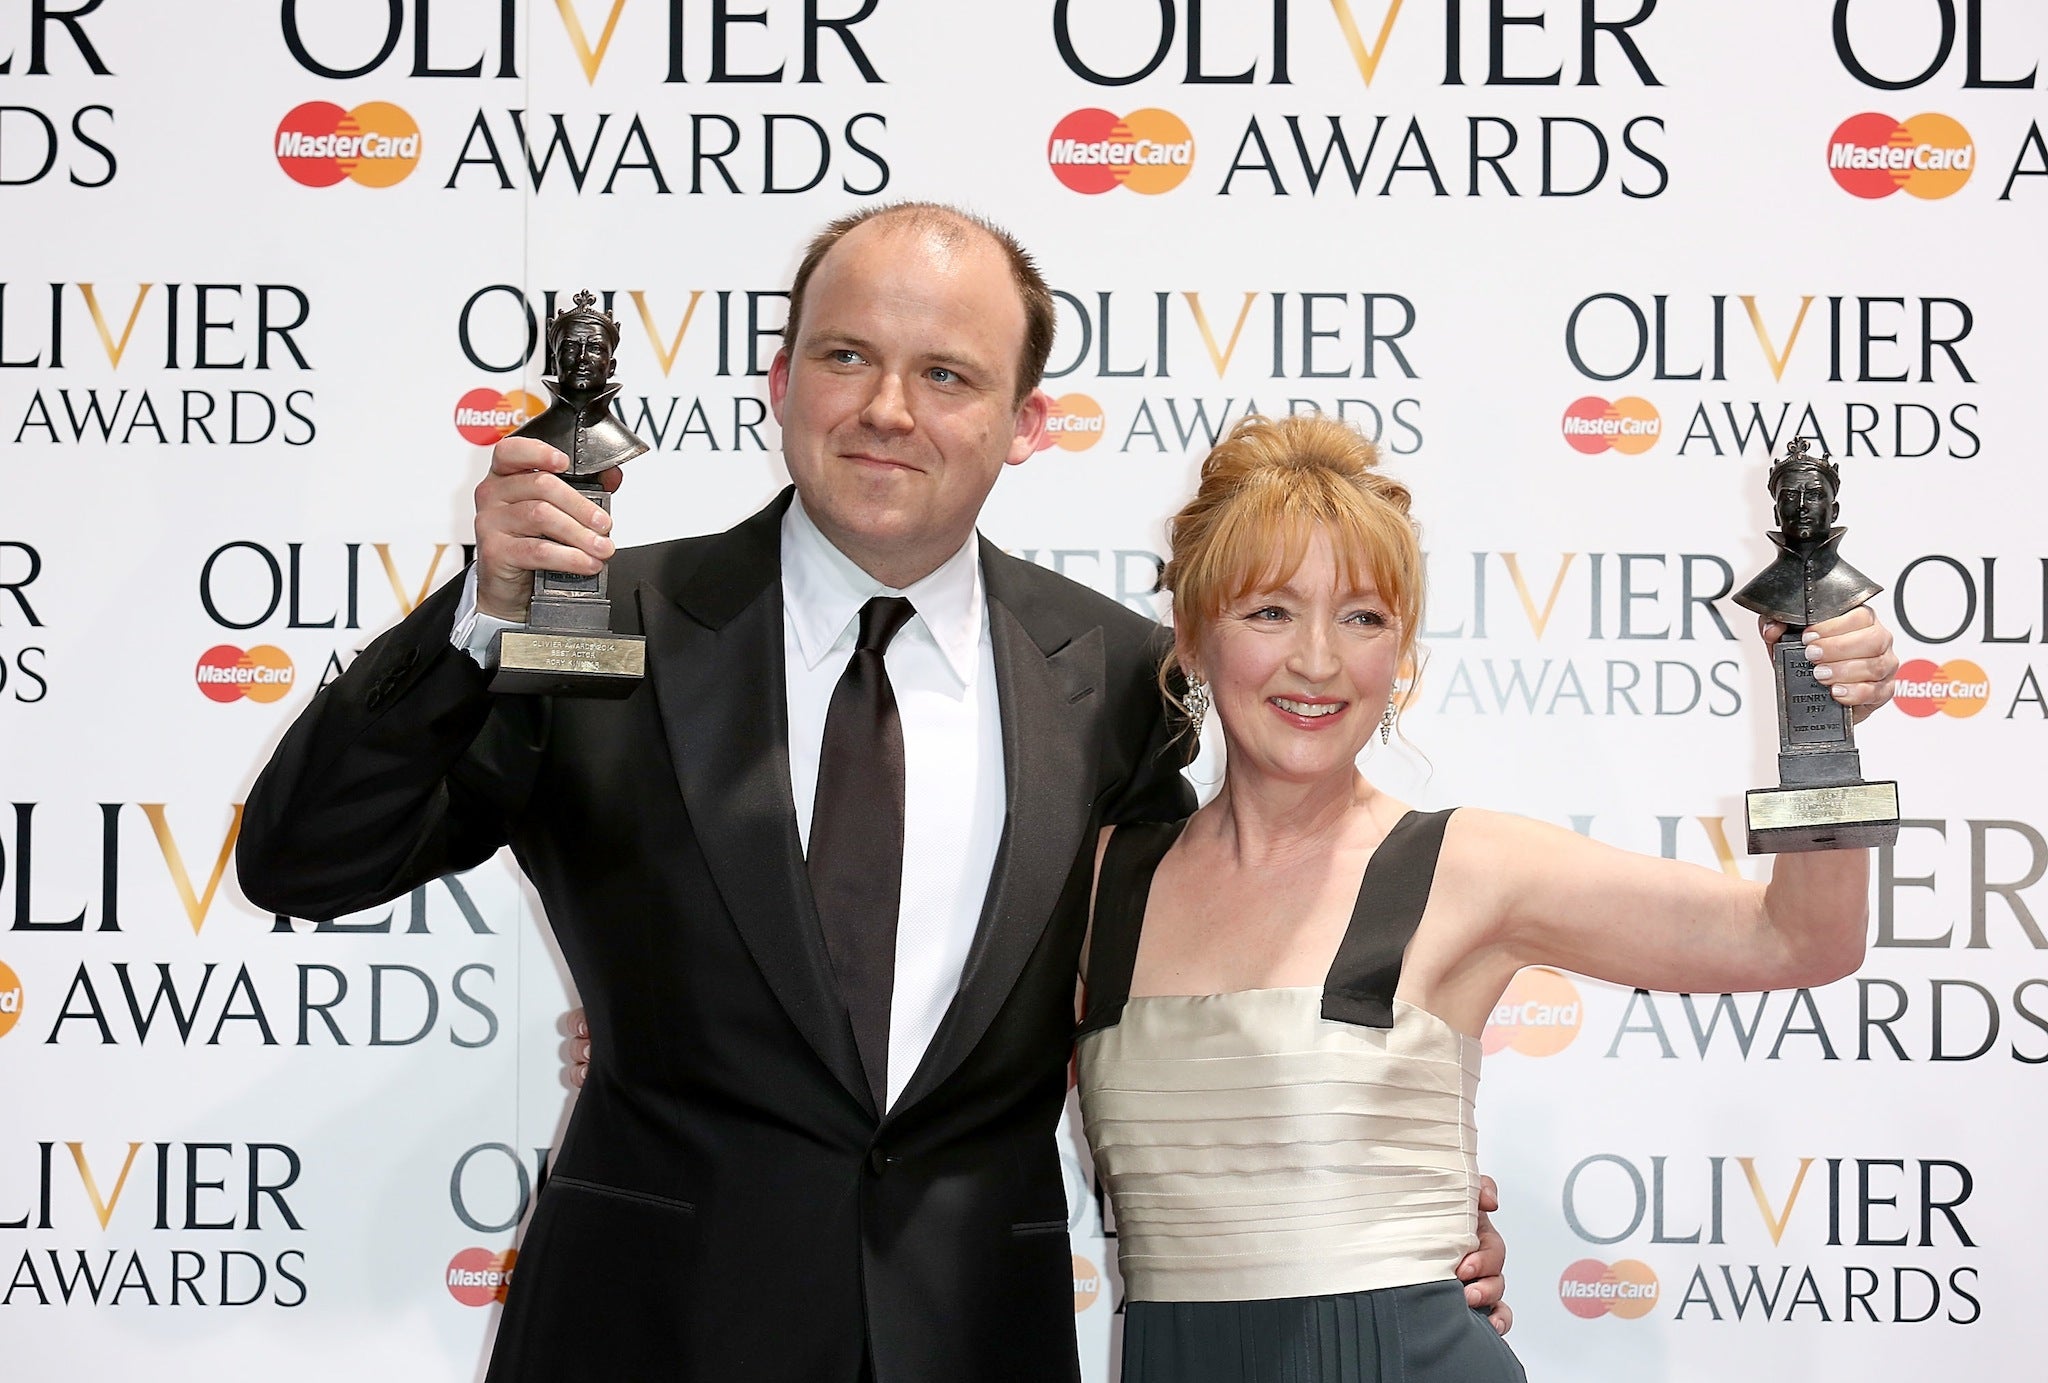 Rory Kinnear and Lesley Manville celebrate winning Best Actor and Best Actress at the Olivier Awards 2014